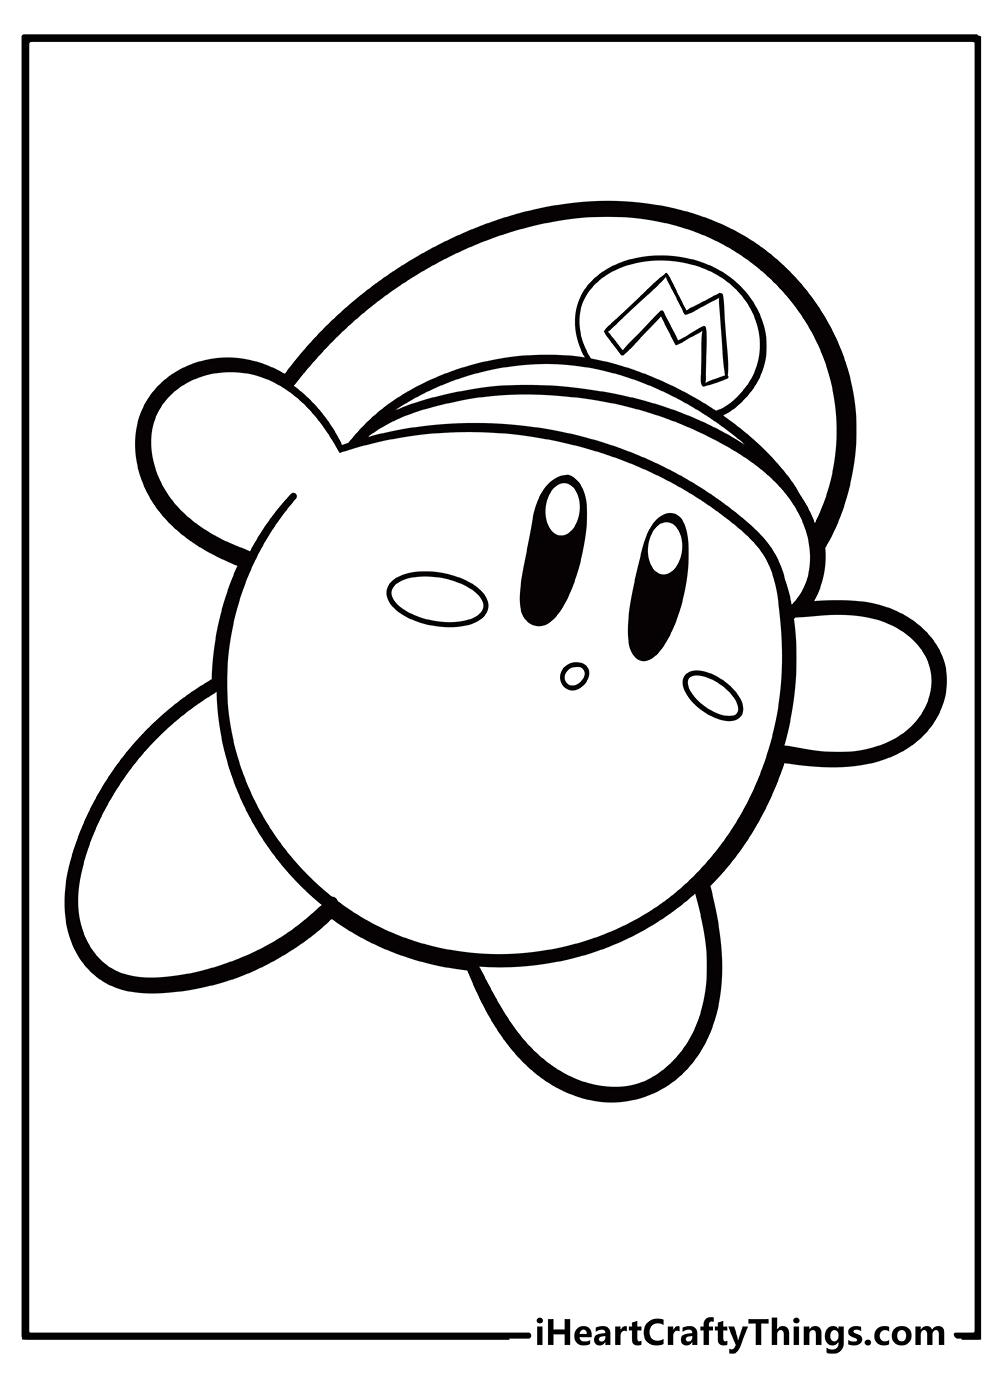 Kirby Coloring Pages free pdf download